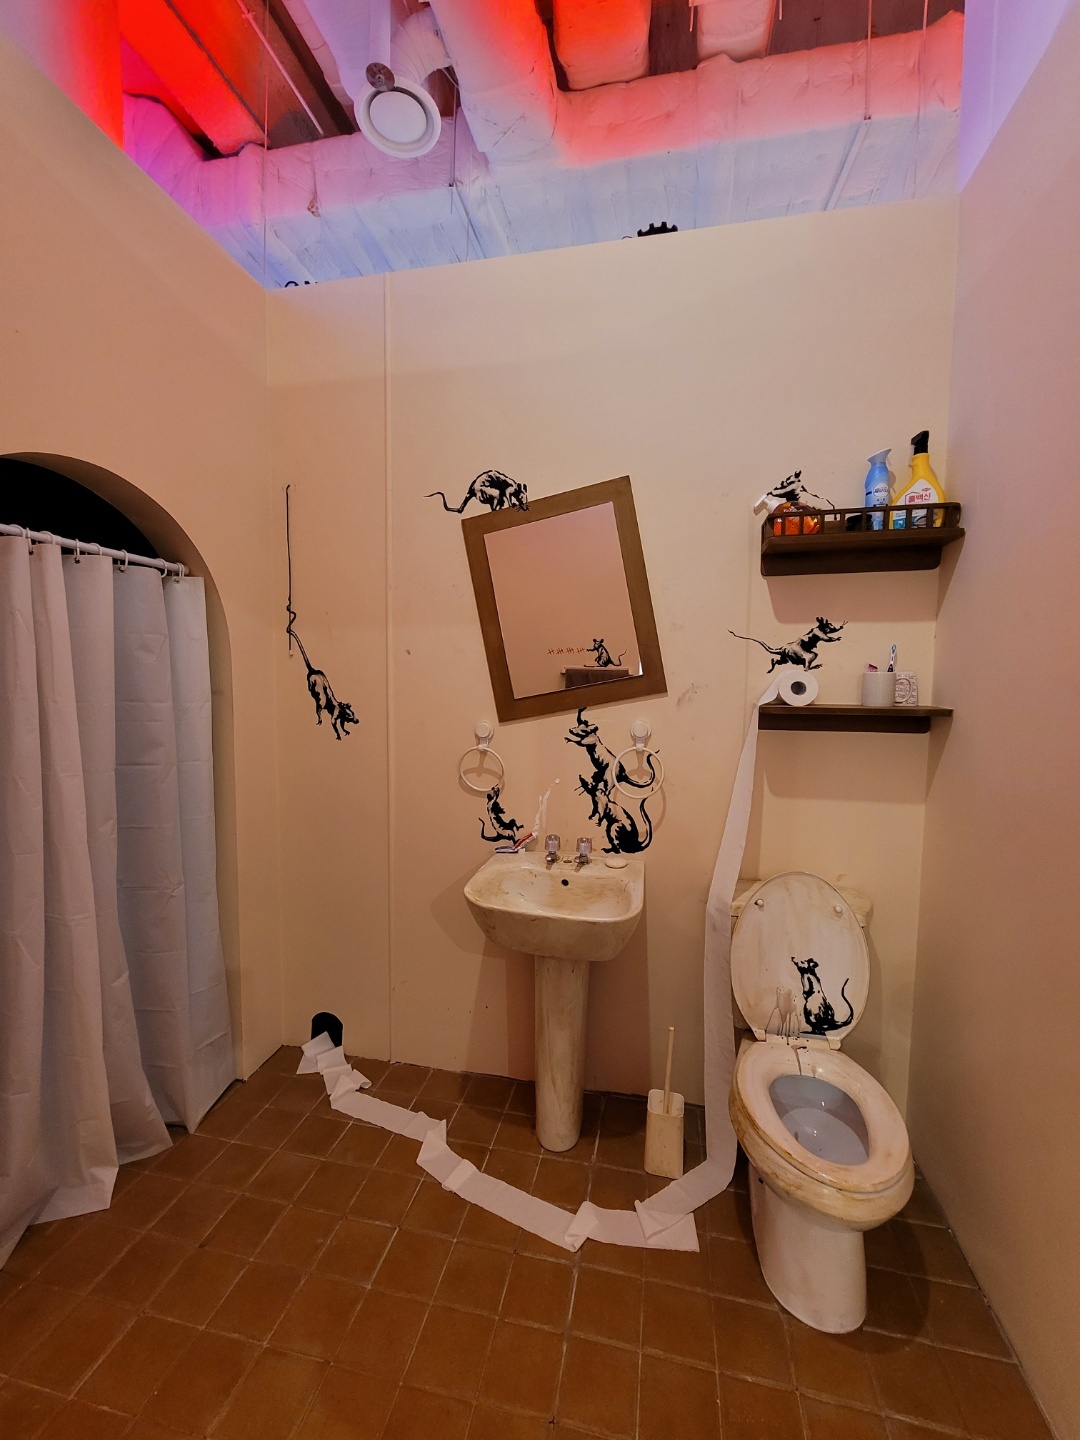 A reproduction of Banksy’s “Bathroom” shown at the exhibition “The Art of Banksy - Without Limits” (Park Yuna/The Korea Herald)